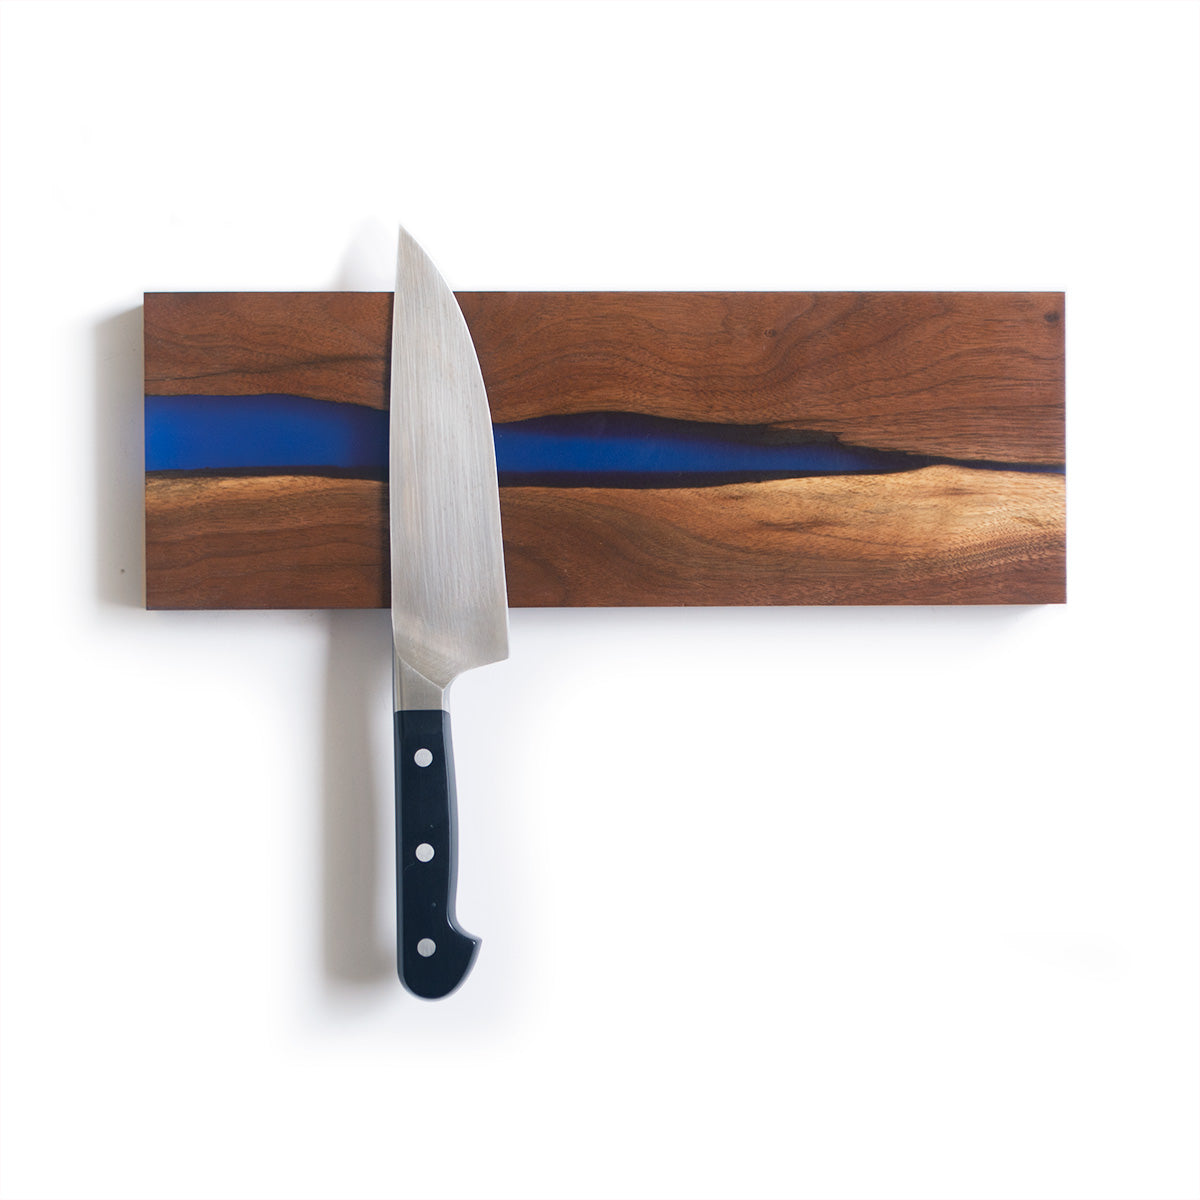 wooden magnetic knife holder handcrafted with walnut hardwood and sapphire blue epoxy resin